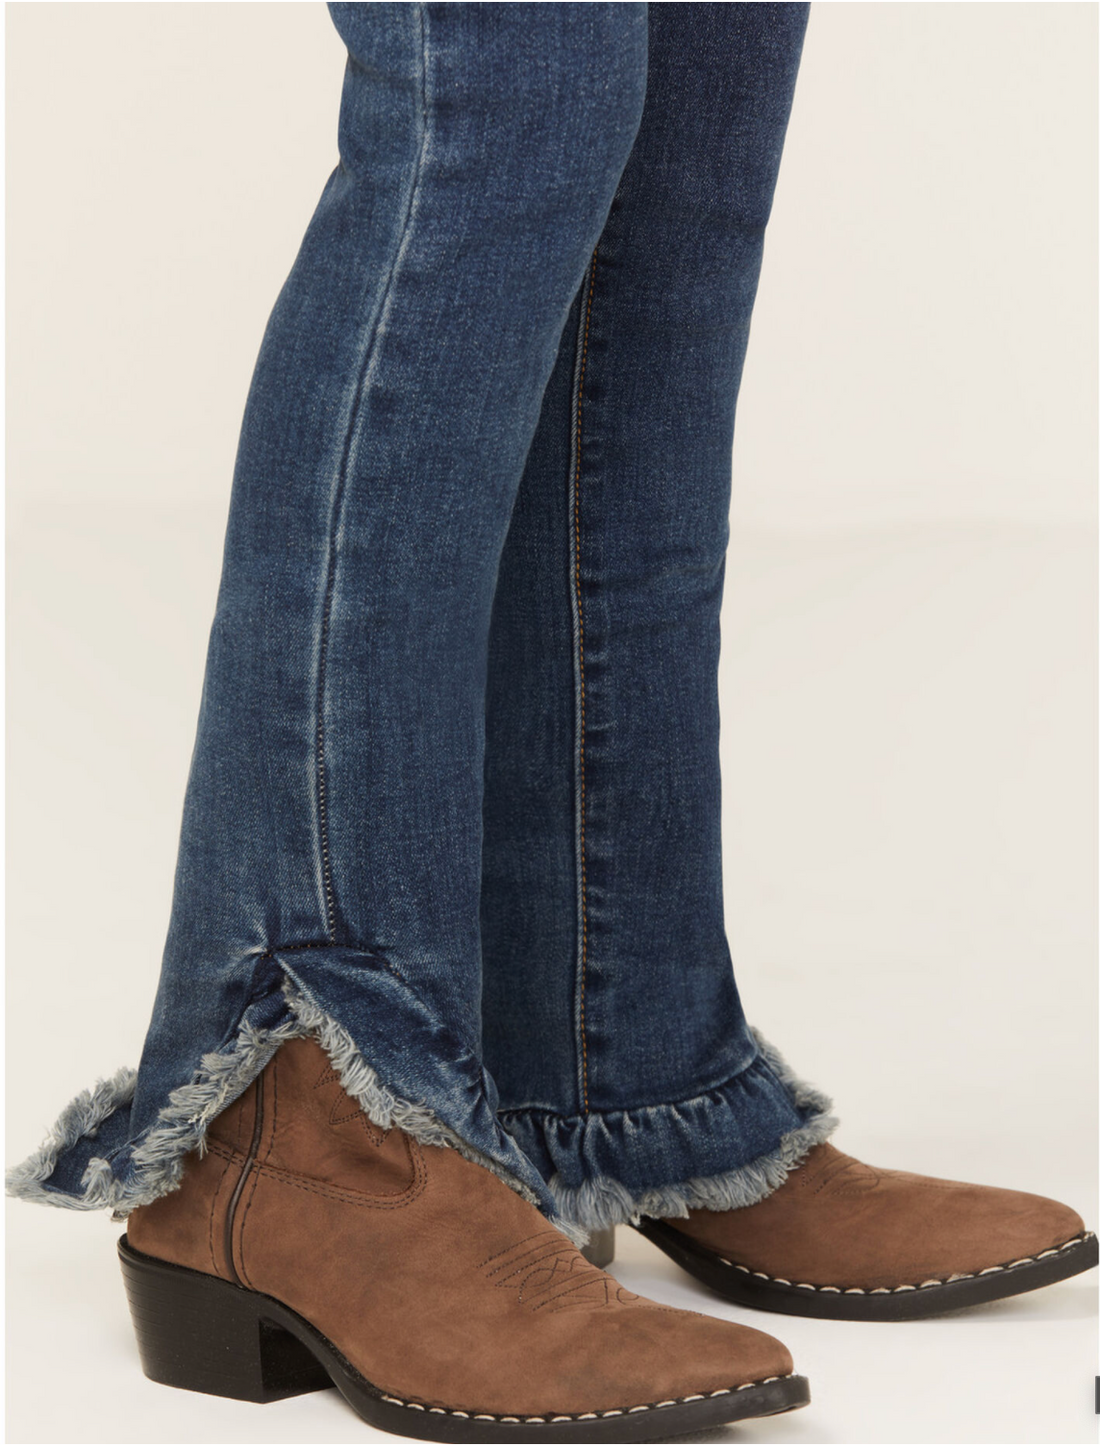 Frayed Skinny Jeans - That's So Darling